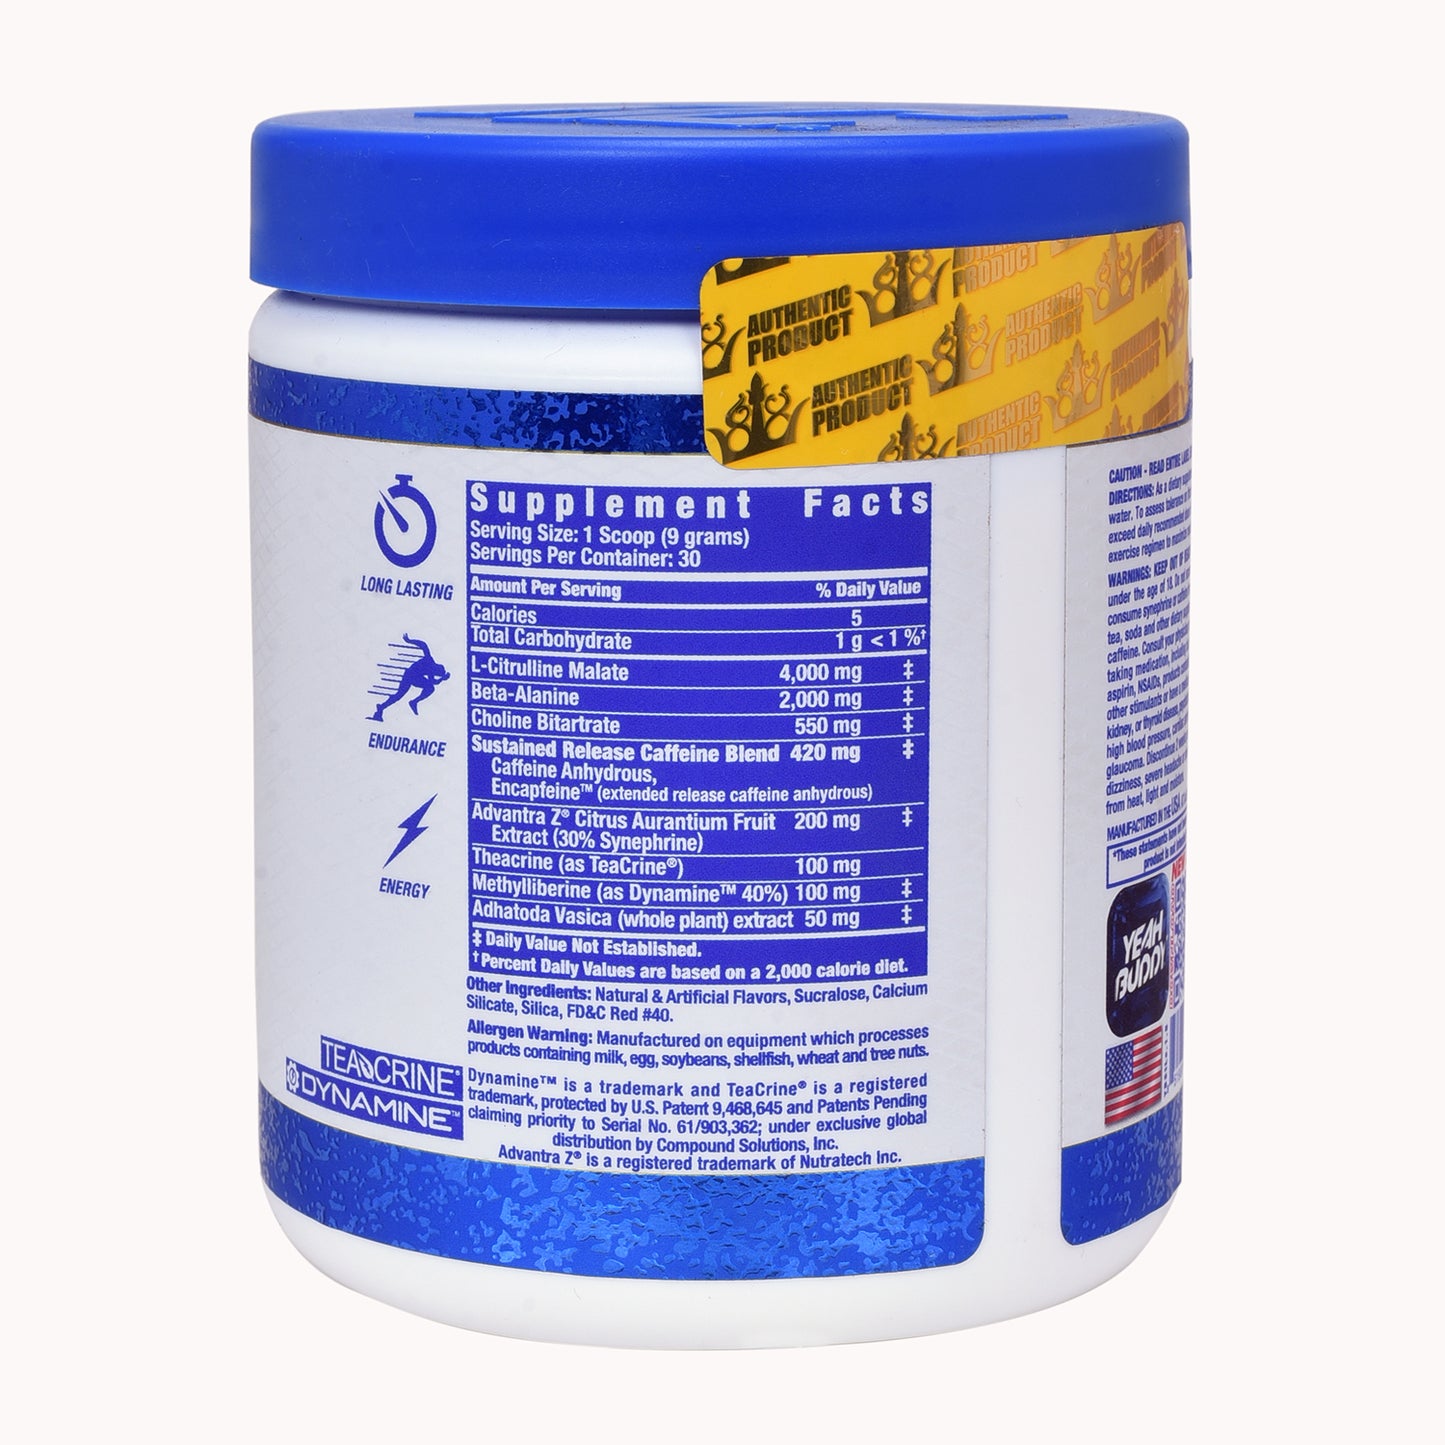 Ronnie Coleman Yeah Buddy Pre workout Powder 30 servings